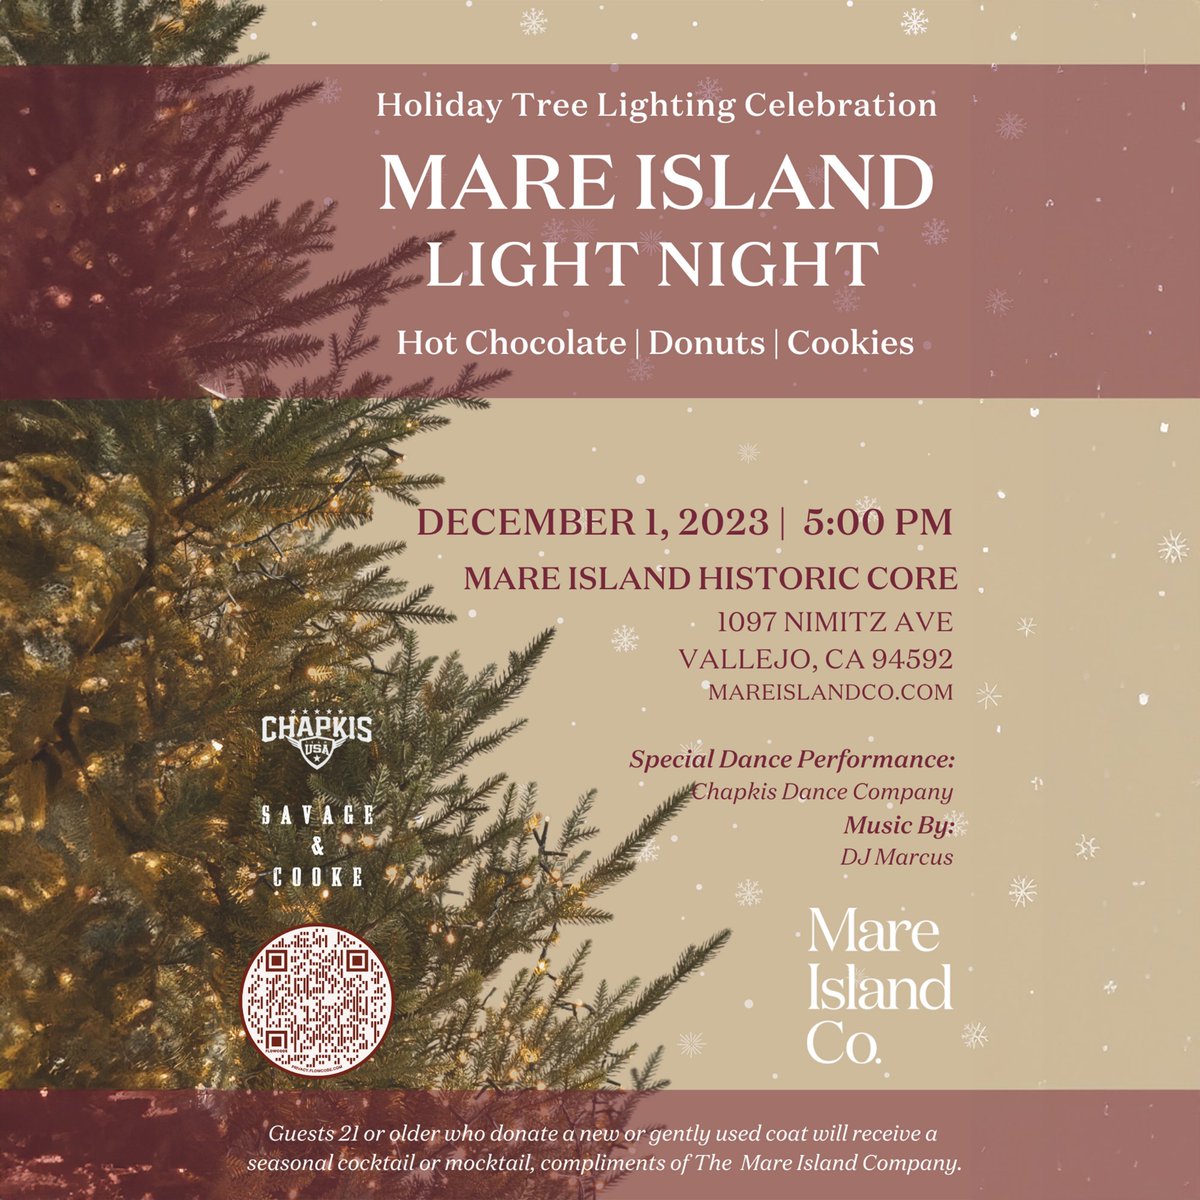 Join us under the twinkling lights at Mare Island Historic Core for a magical Holiday Tree Lighting Celebration on December 1, 2023.